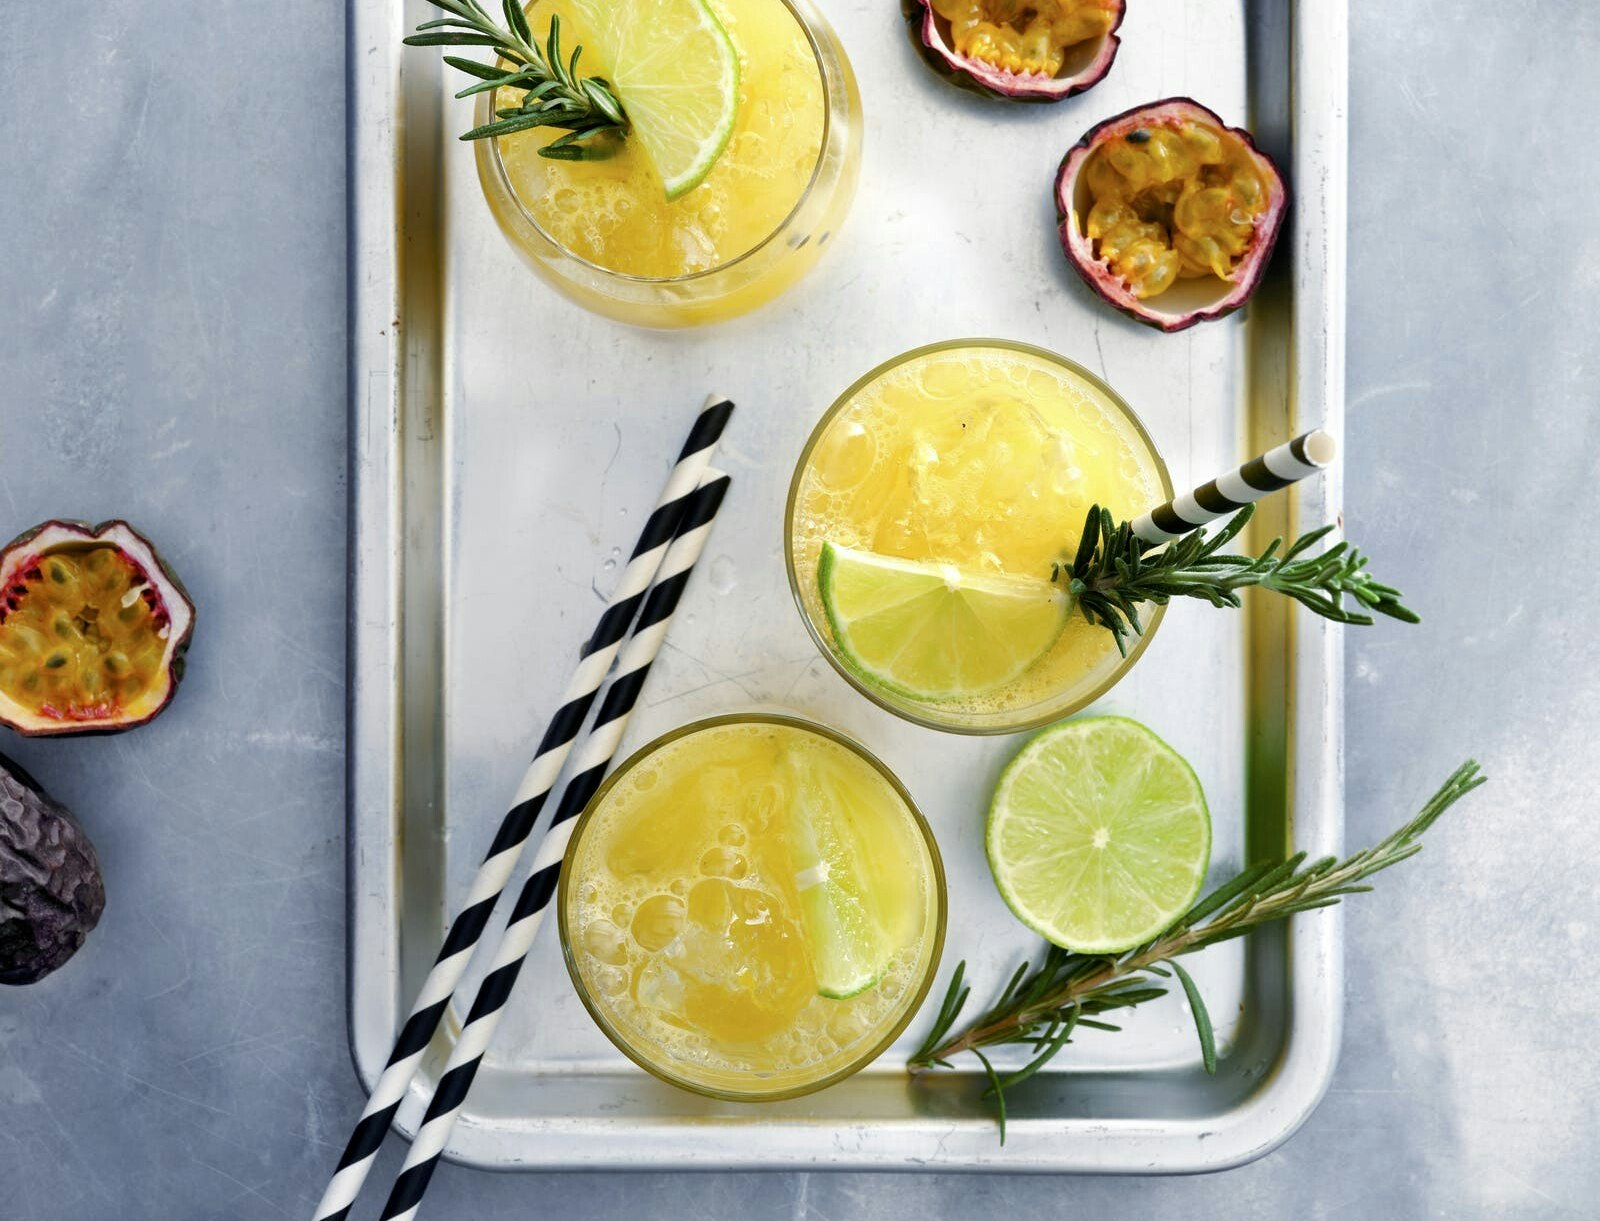 Moscow mule med ananas og passionsfrugt